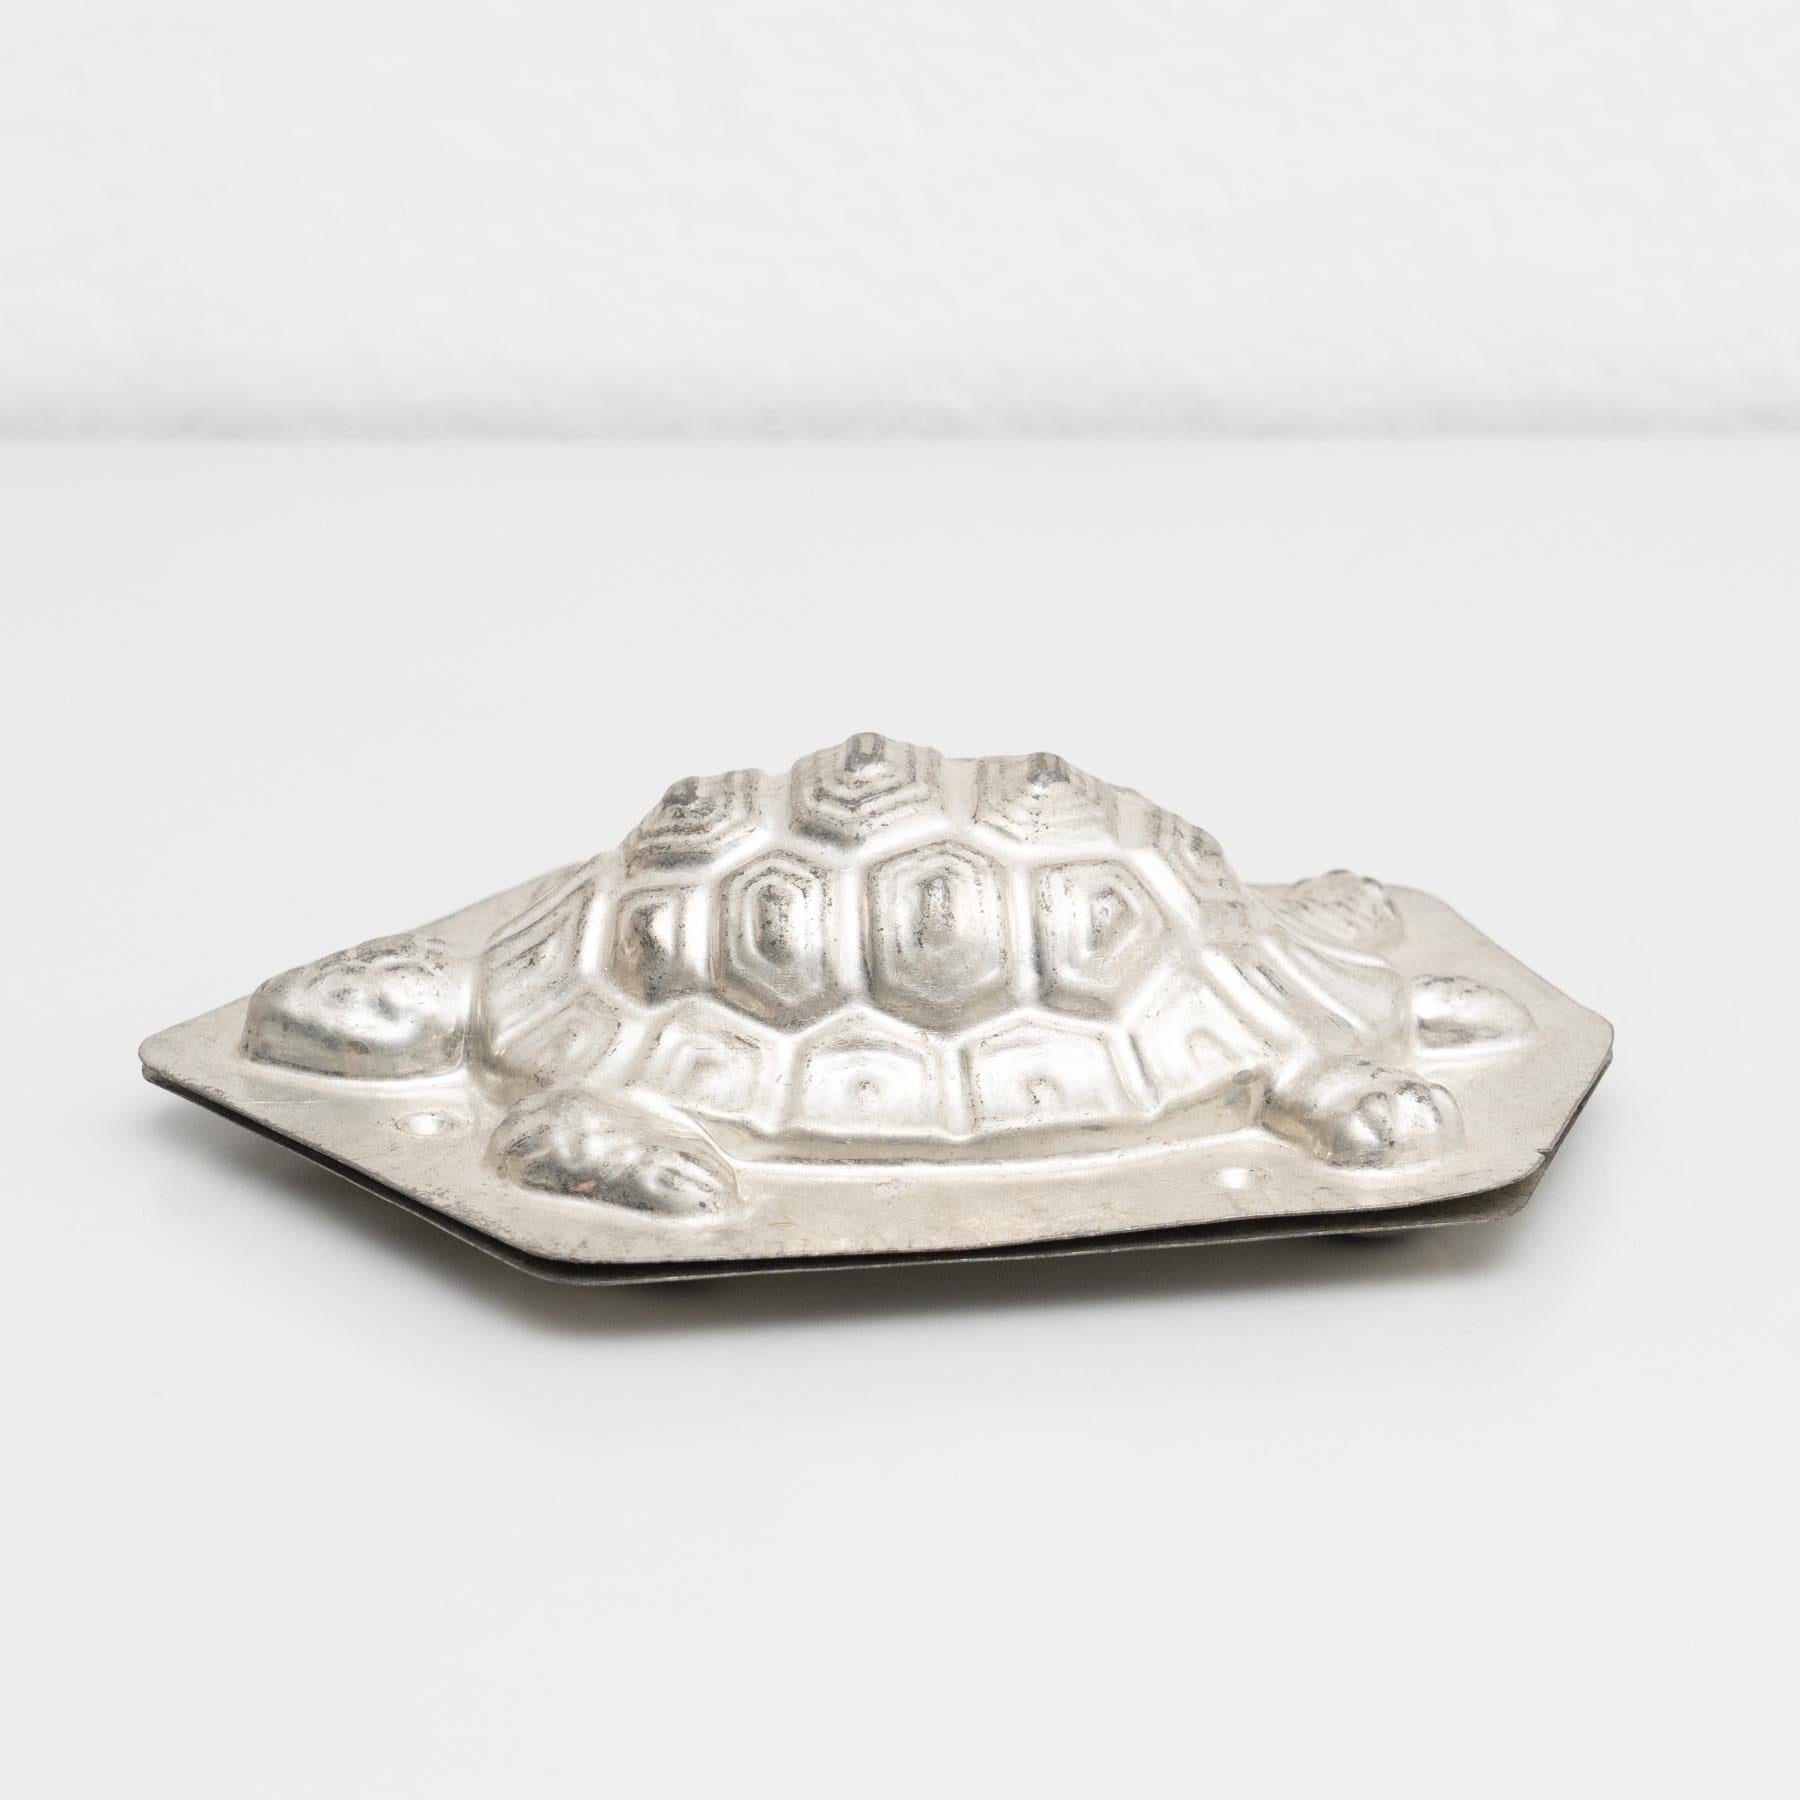 Antique Turtle Shaped Metal Cooking Mold, circa 1950 In Good Condition For Sale In Barcelona, Barcelona